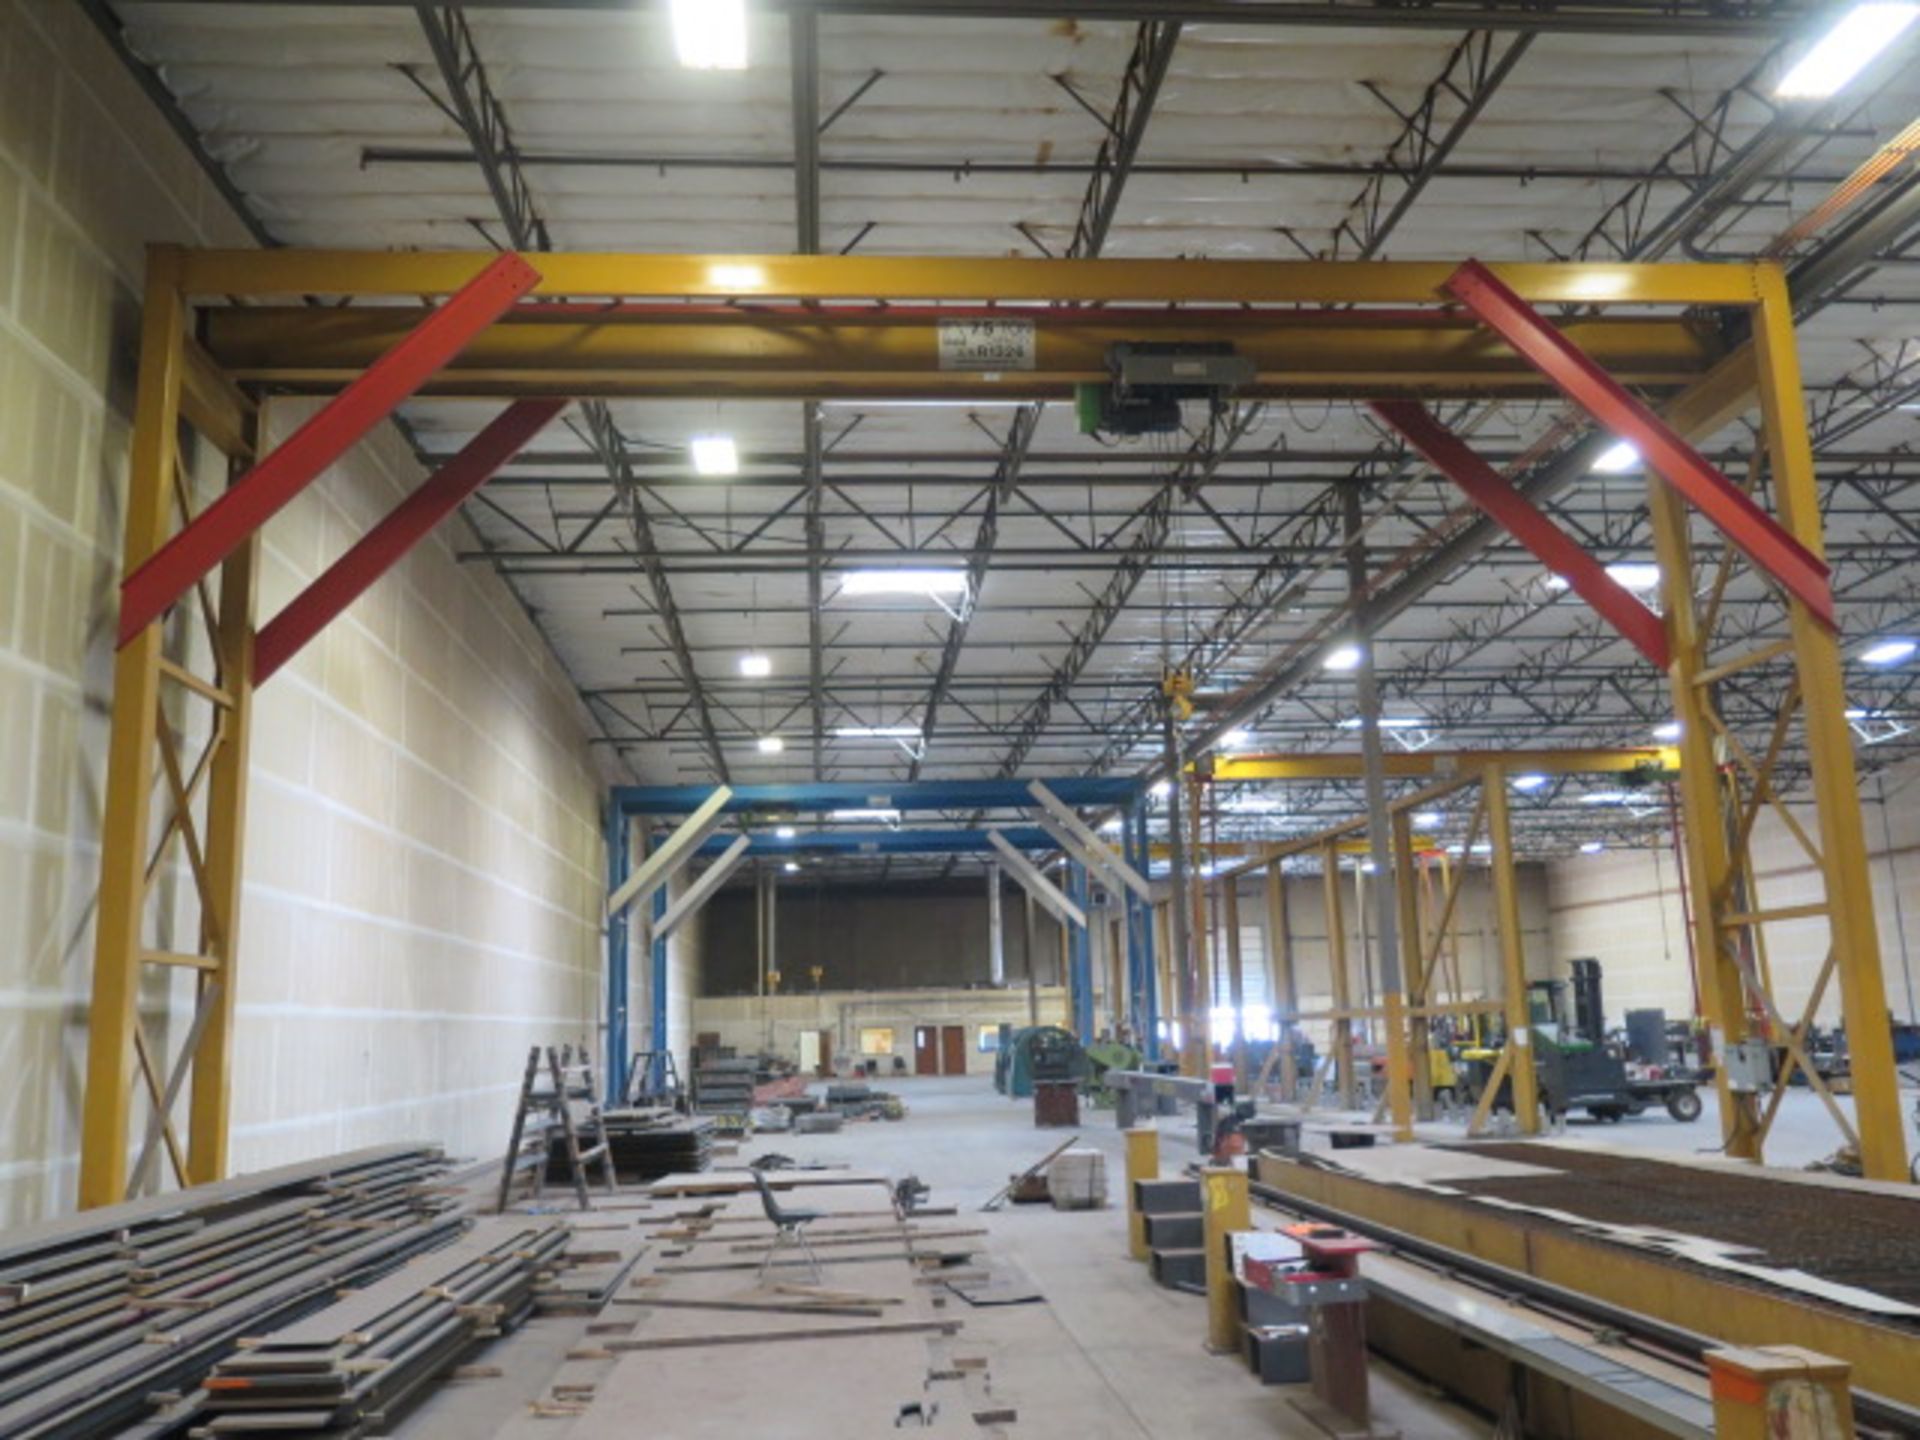 7.5 Ton Cap Rolling Frame Gantry w/ 47’ Span, Remote Control, 80’ Track and Electrical SOLD AS-IS - Image 2 of 13